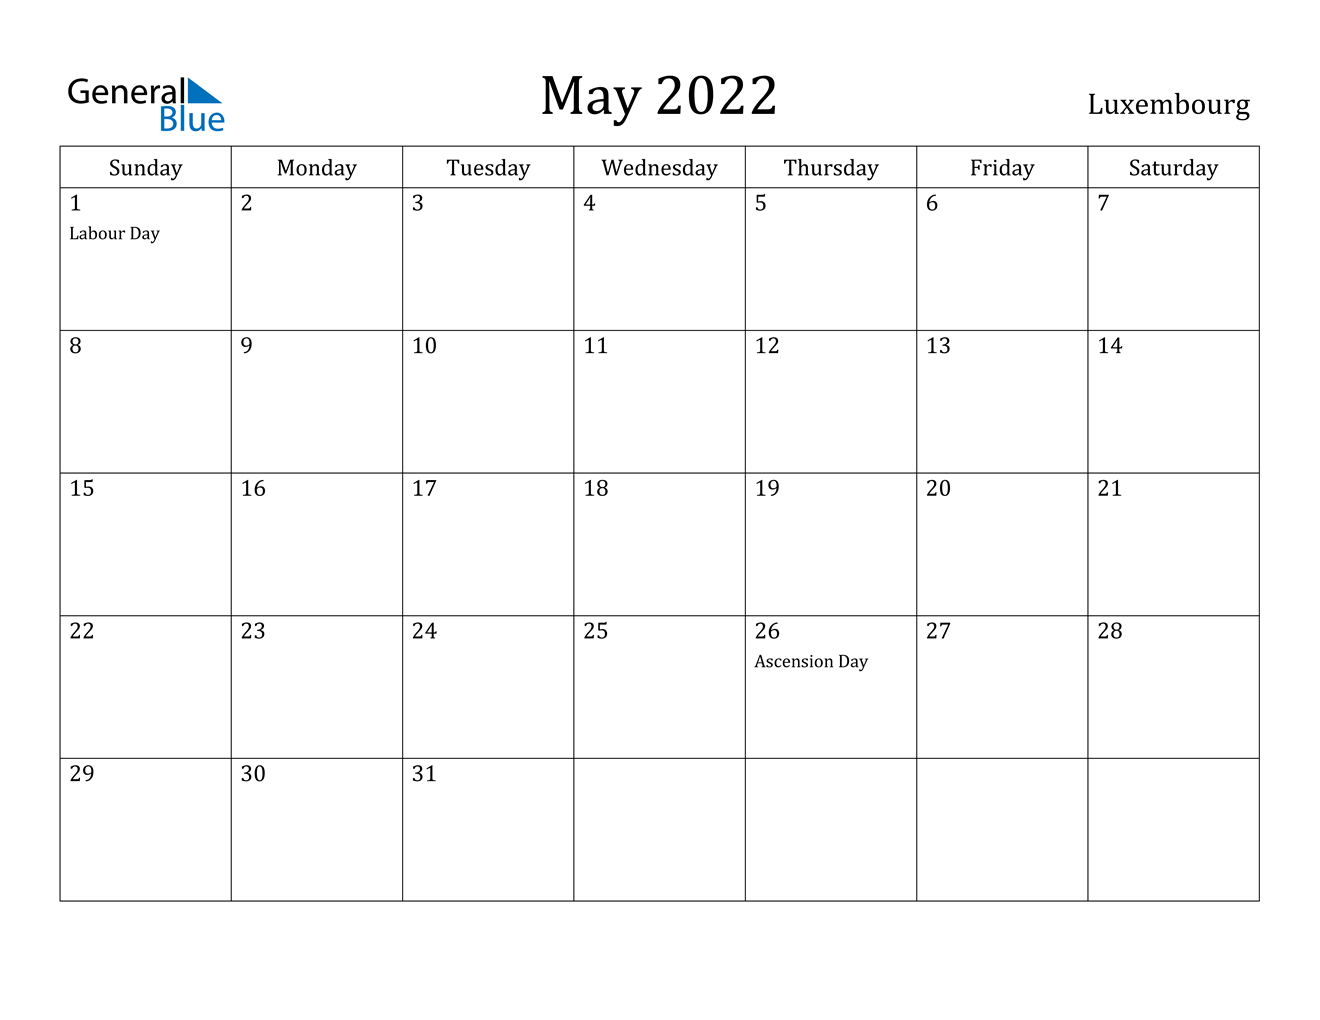 May 2022 Calendar - Luxembourg